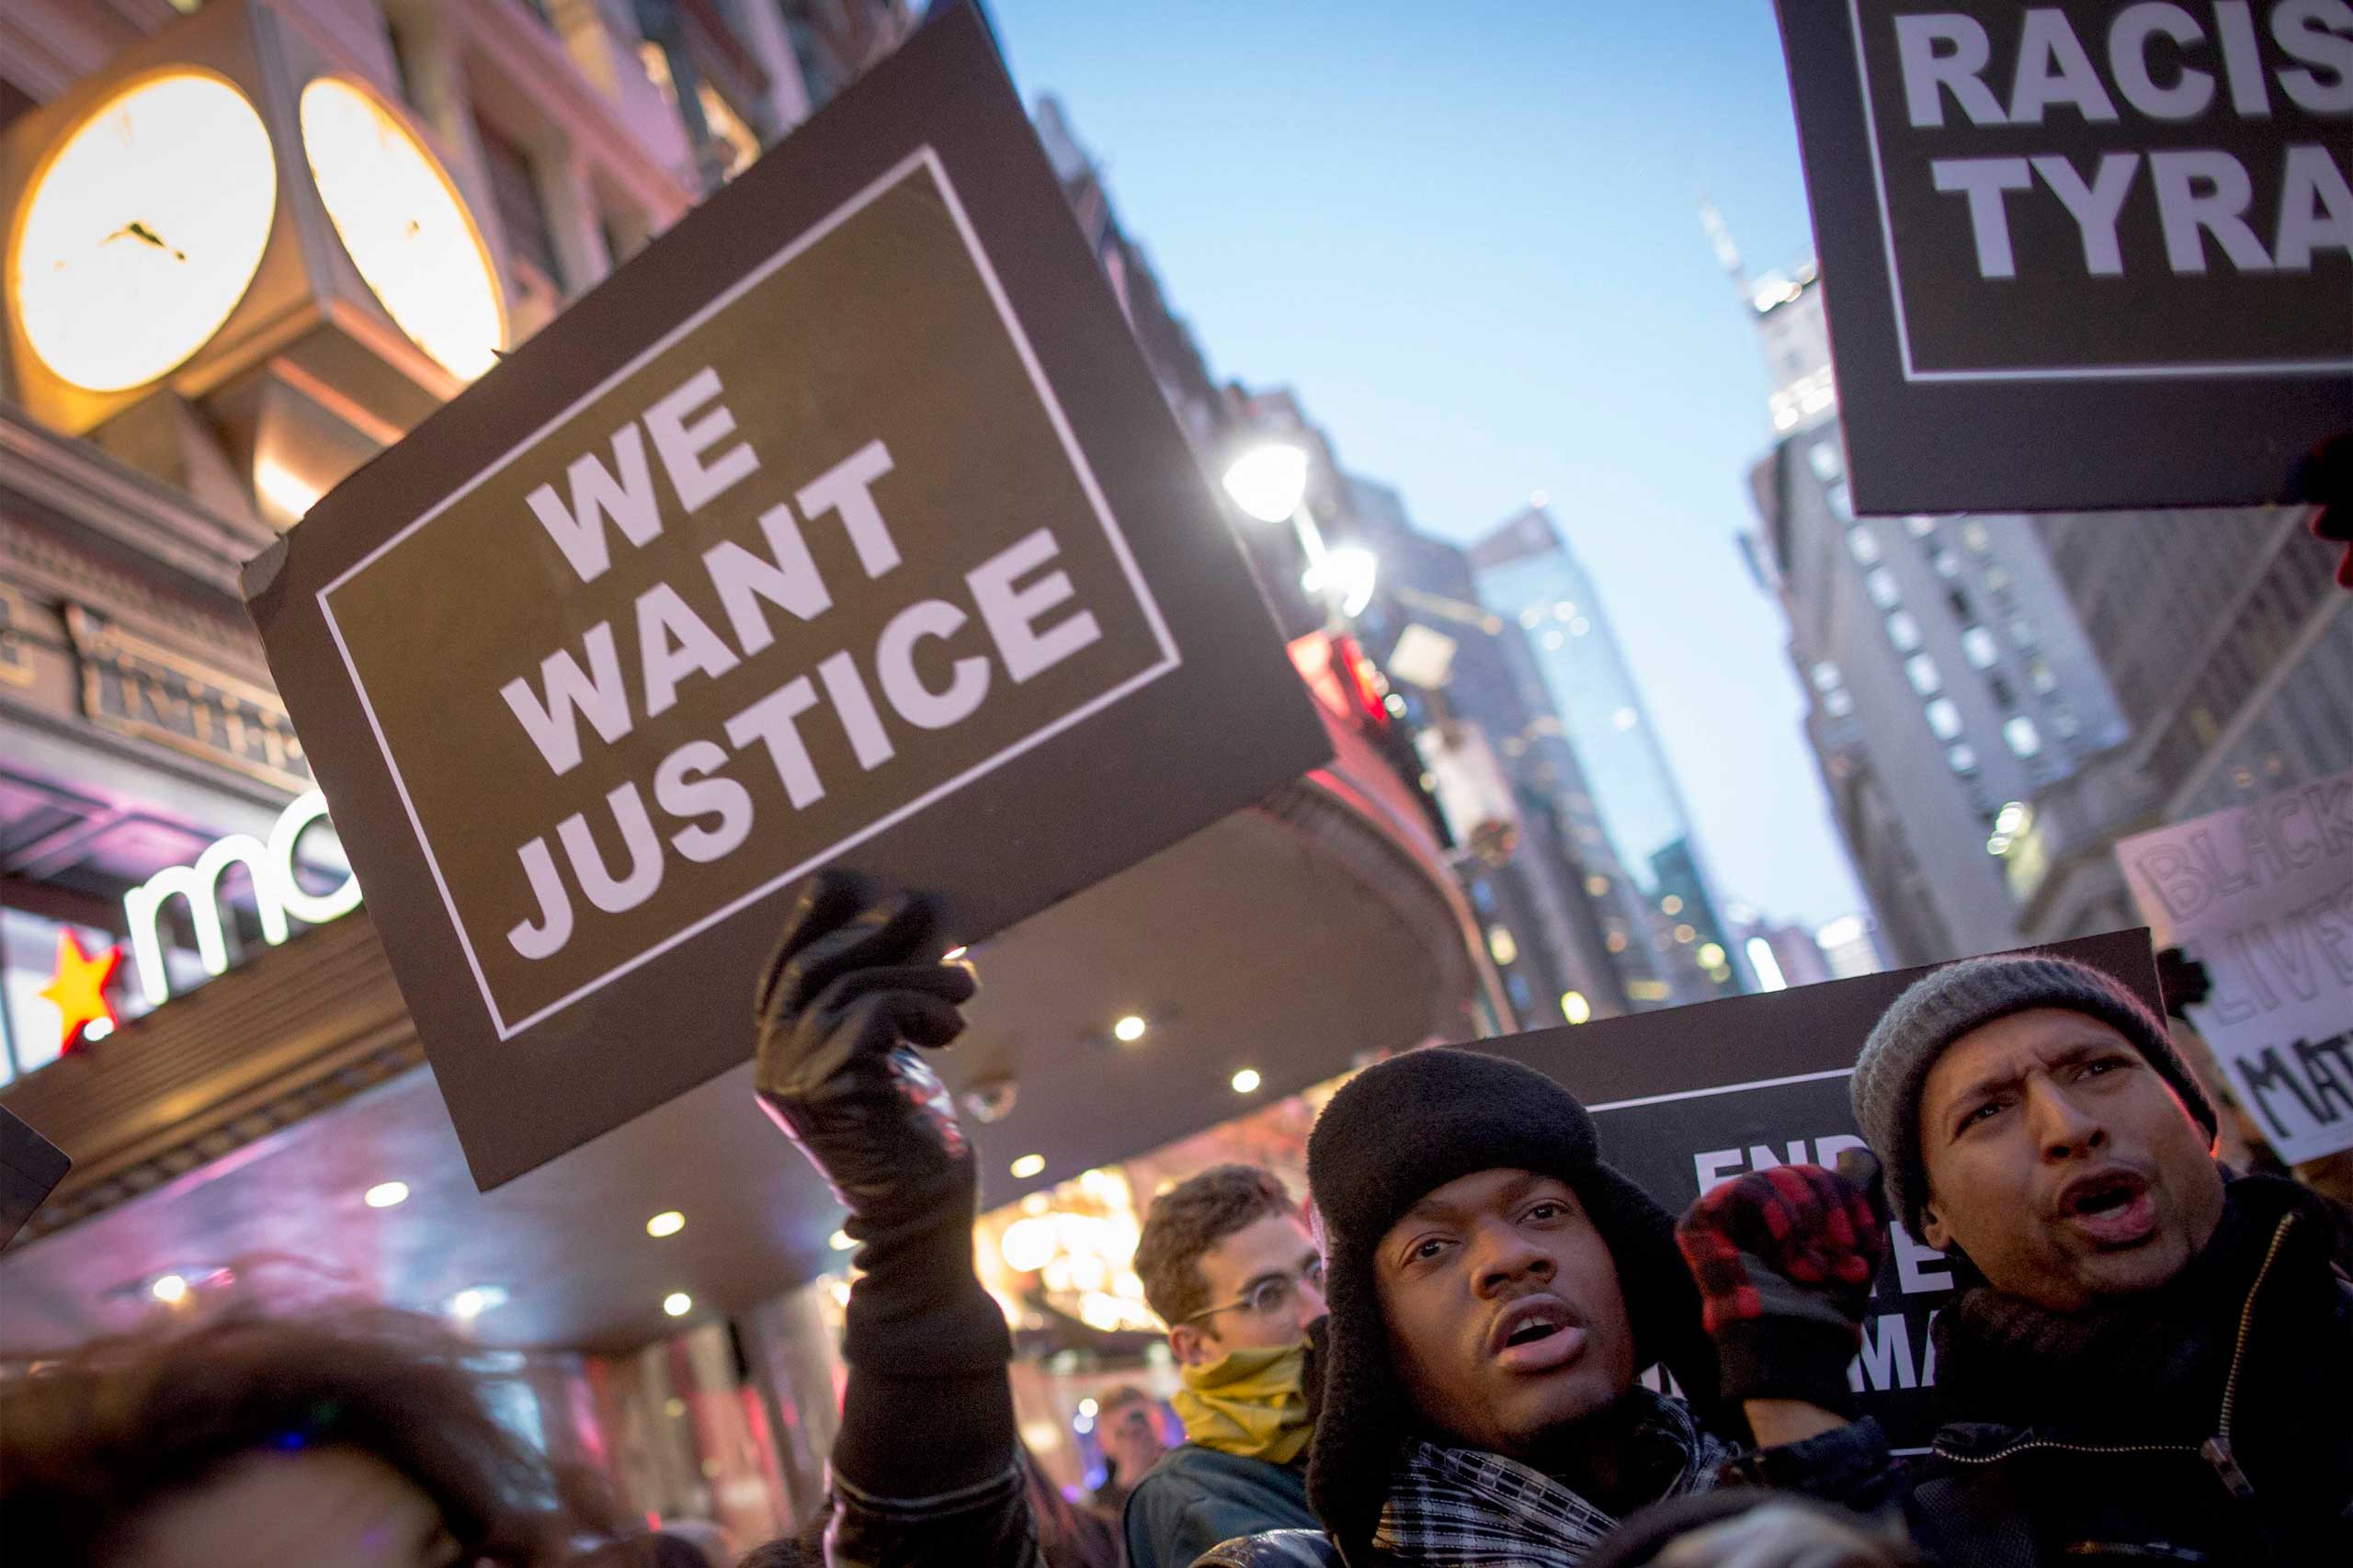 A protester holds up a sign while demonstrating outside of Macy's in Herald Square during the Black Friday shopping day in New York